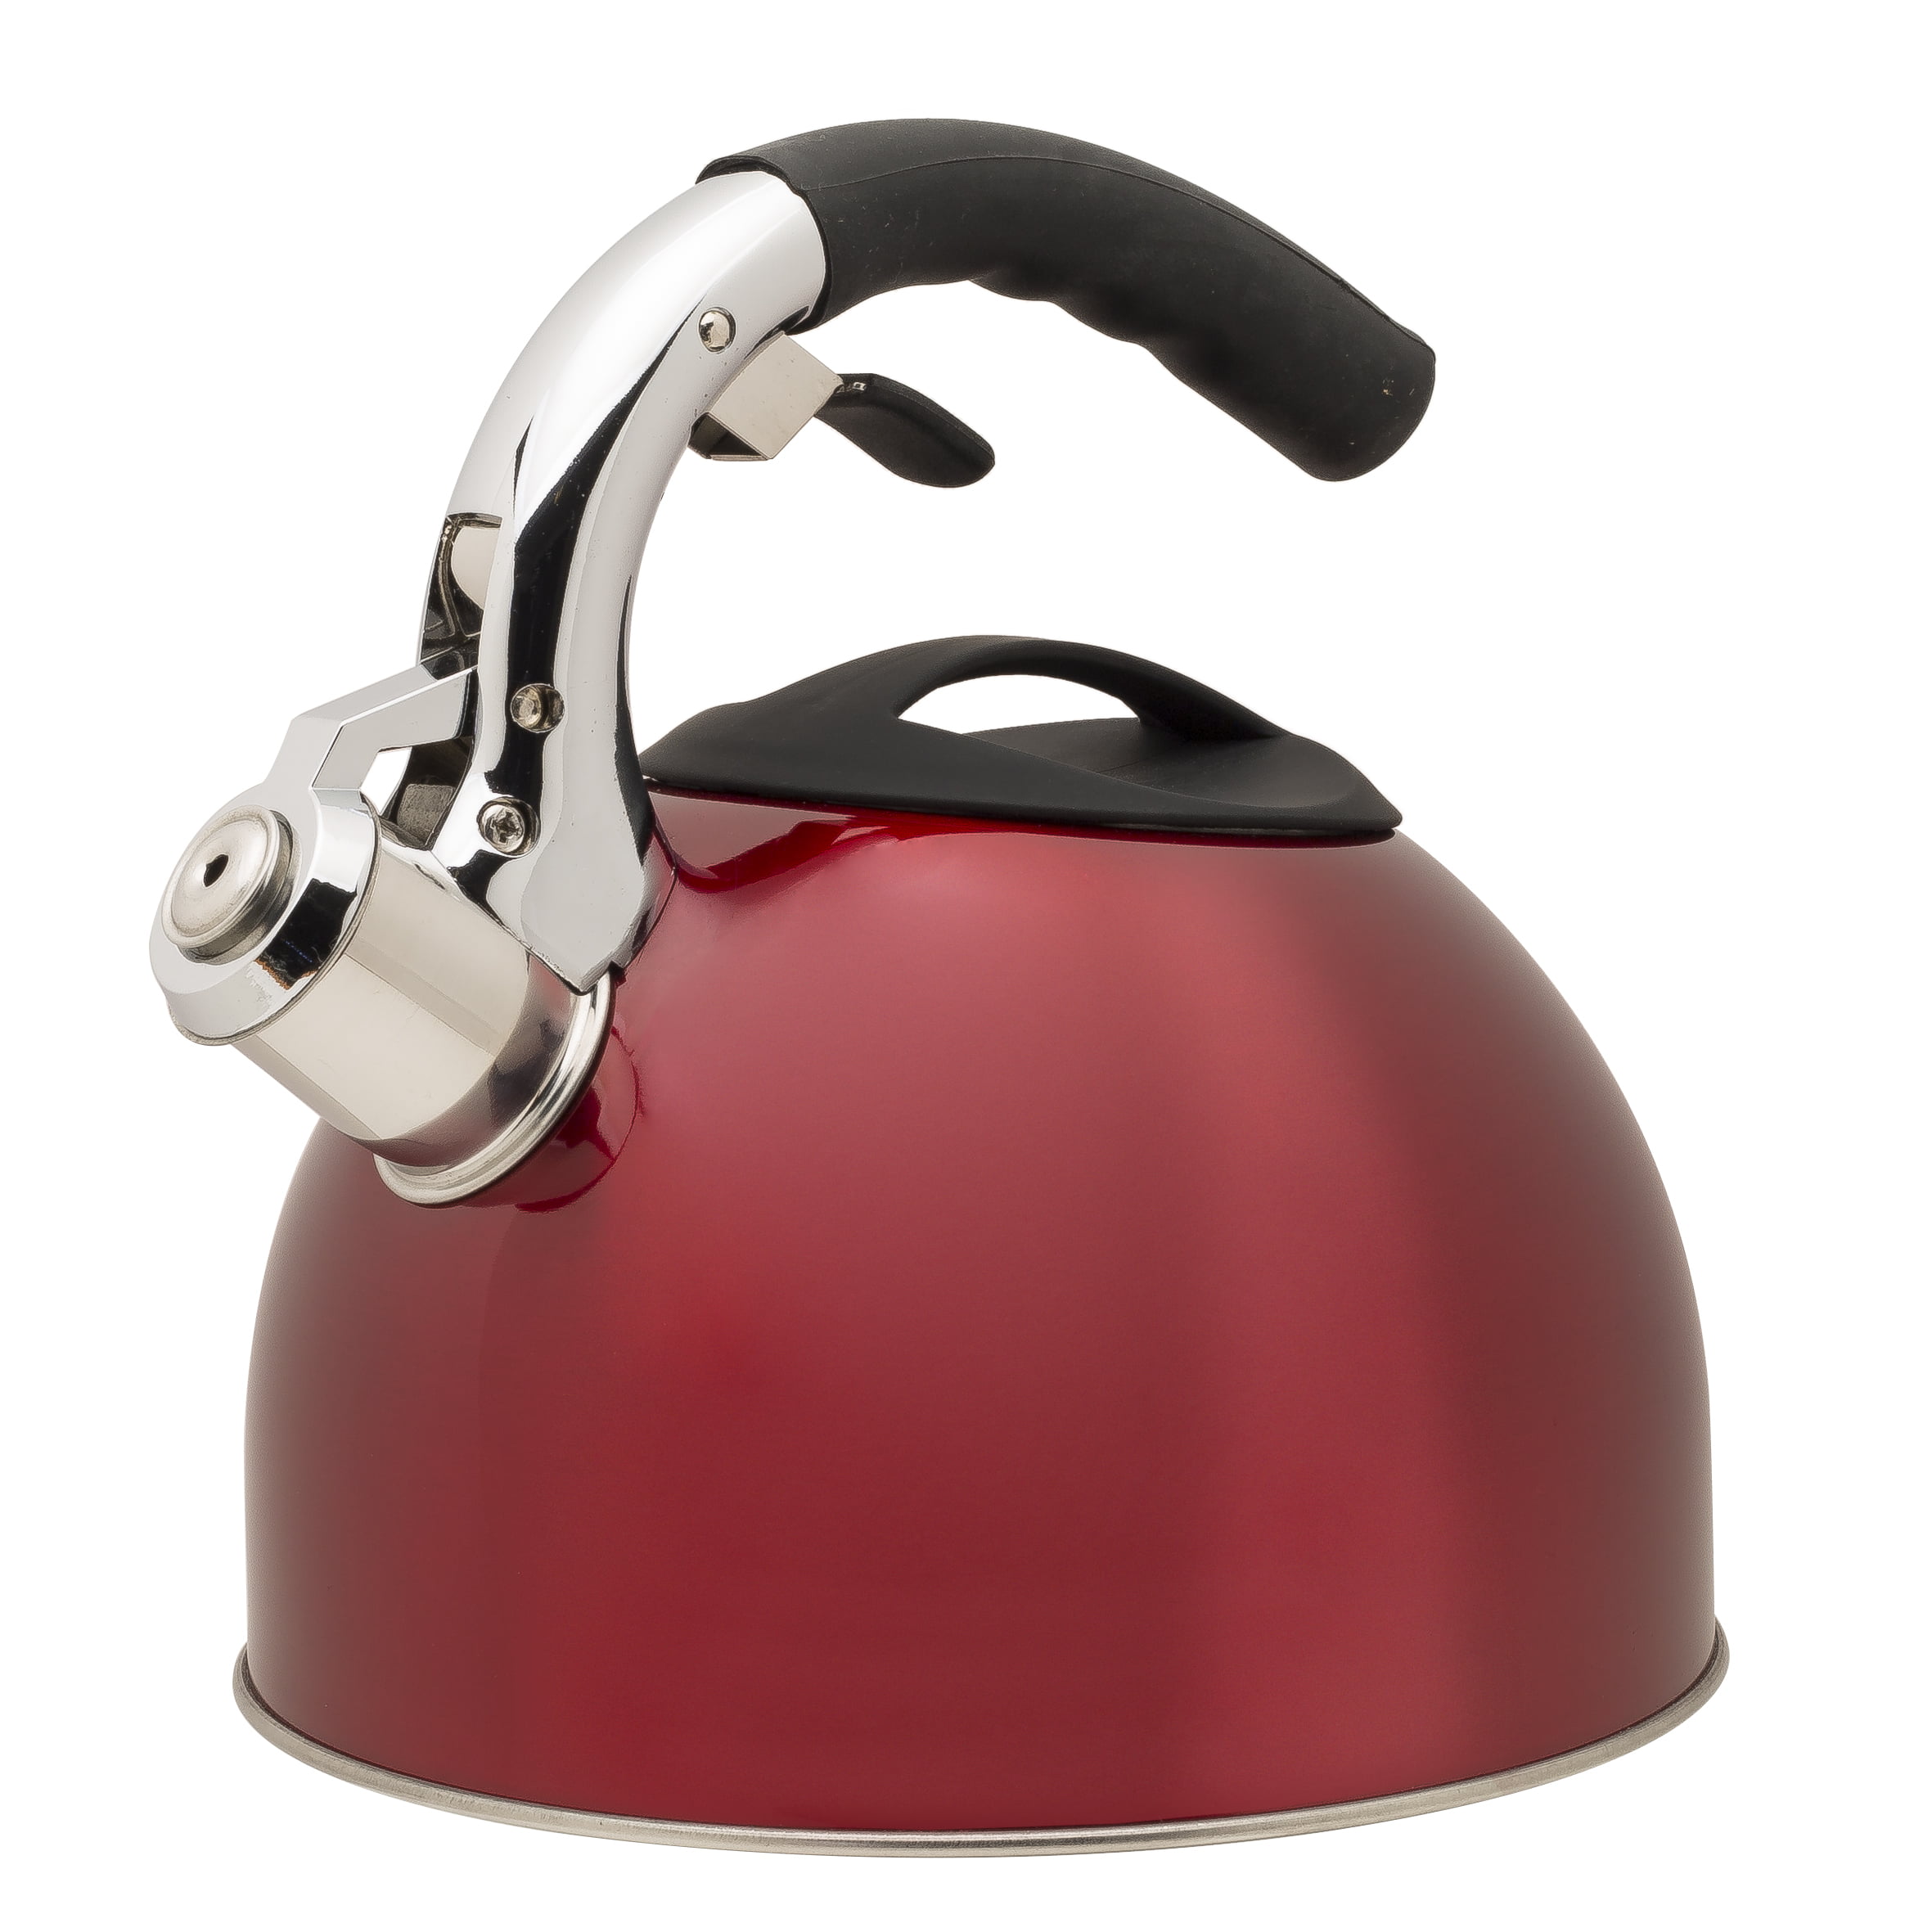 Primula Soft Grip 3 Qt. Stainless Steel Whistling Kettle - Brushed